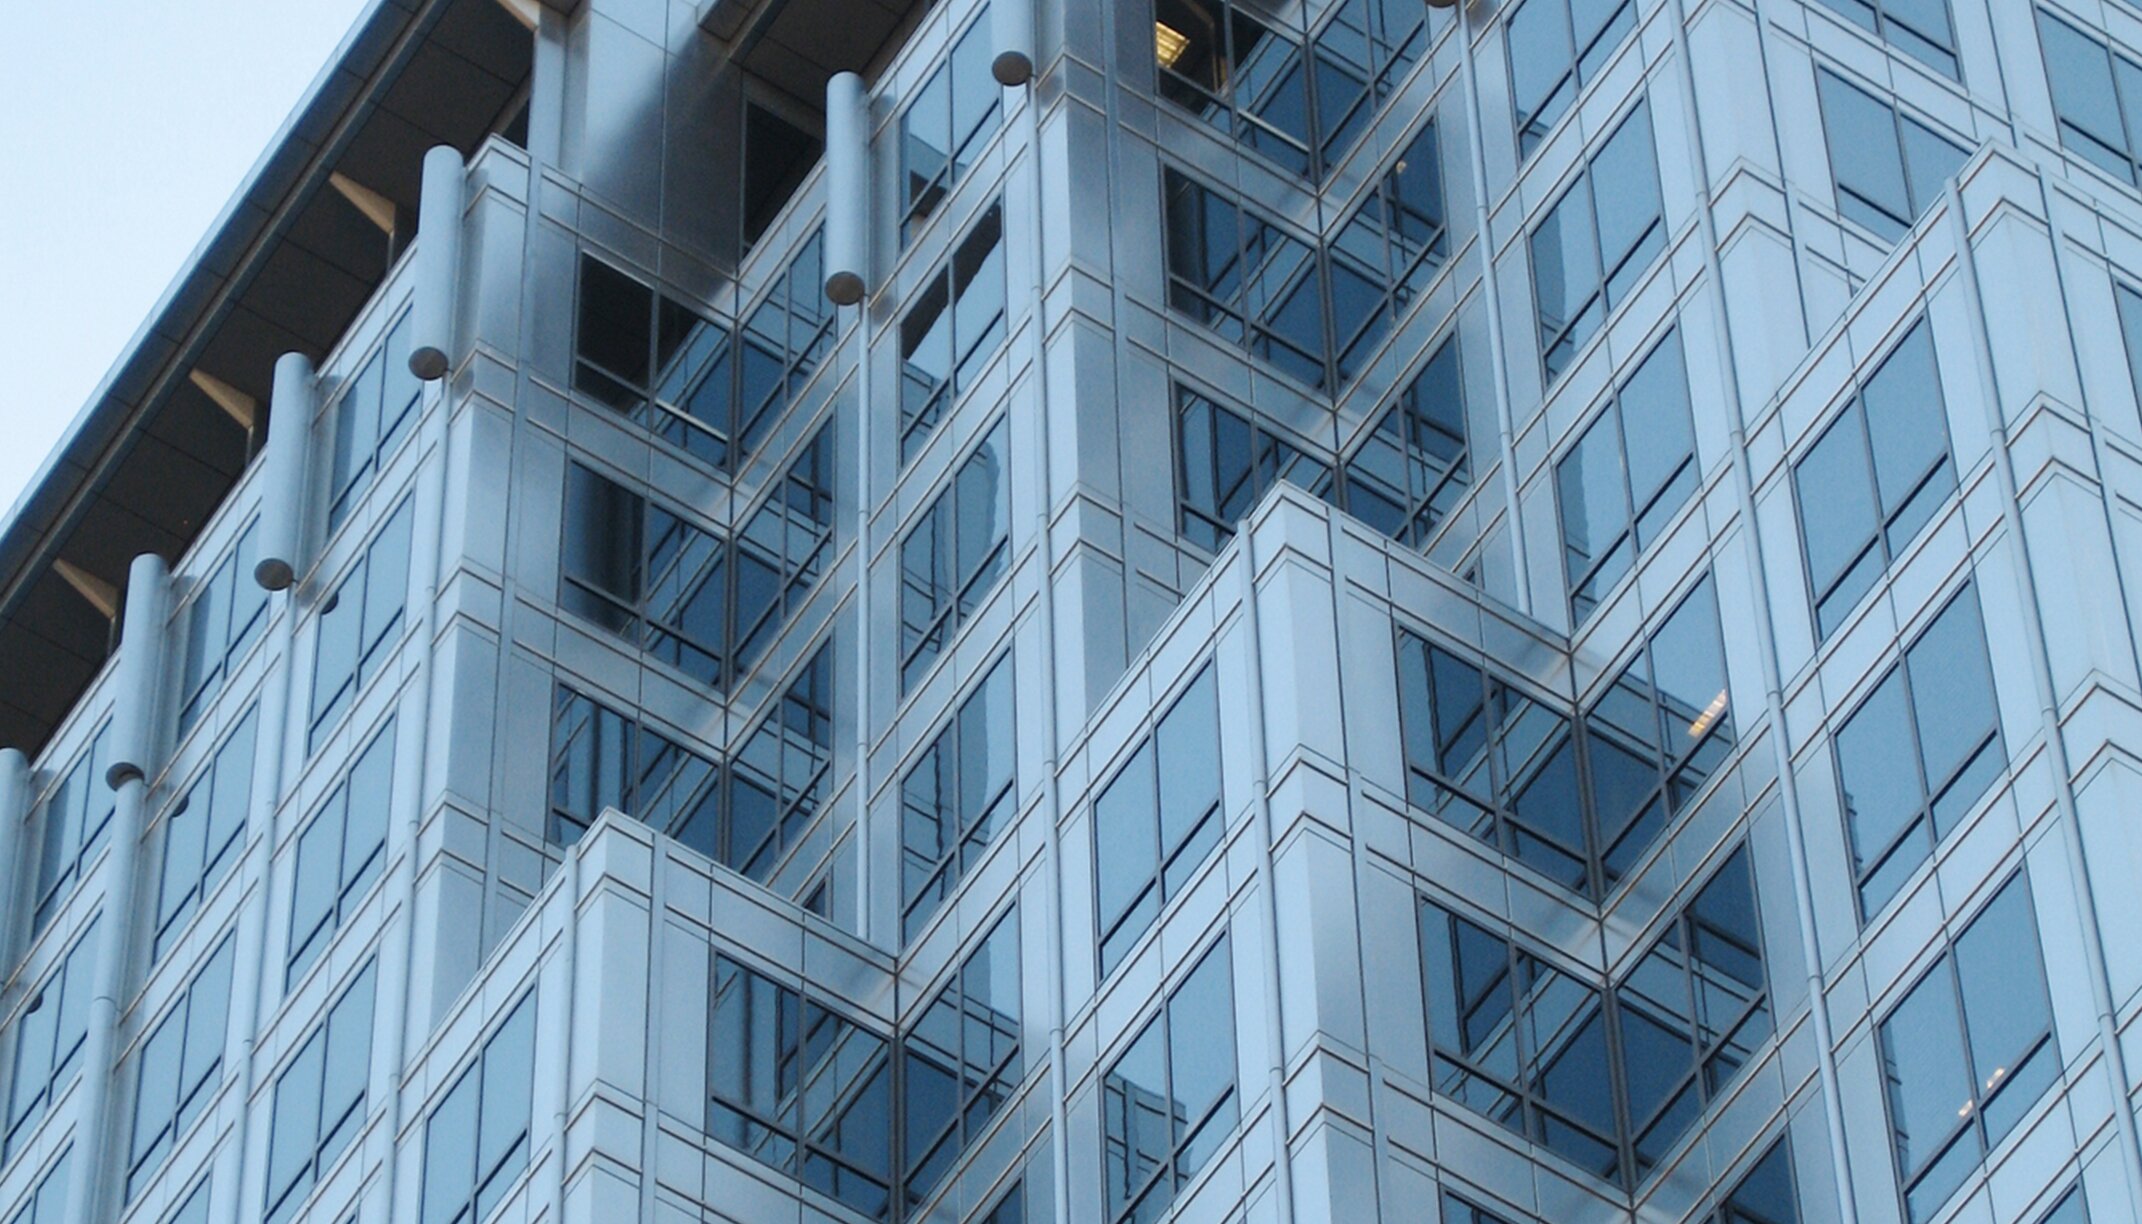 "Plaza Tower" stainless steel facade, Costa Mesa